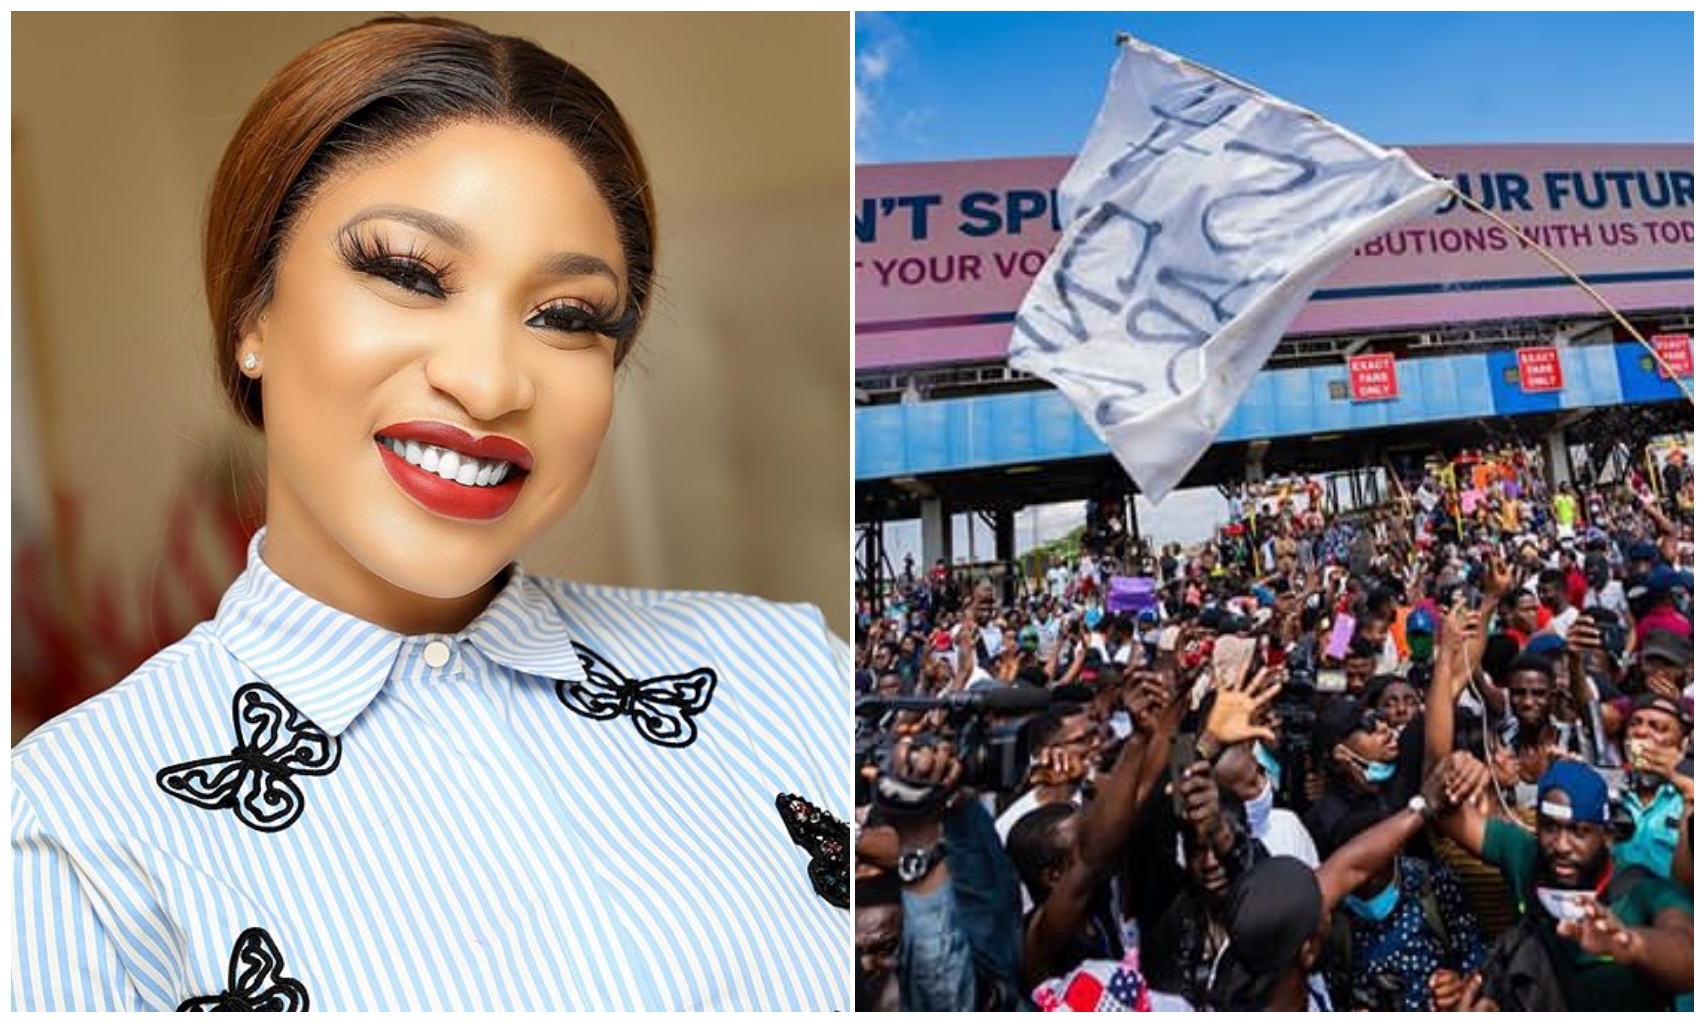 End bad governance through your votes – Tonto Dikeh advise EndSars protesters